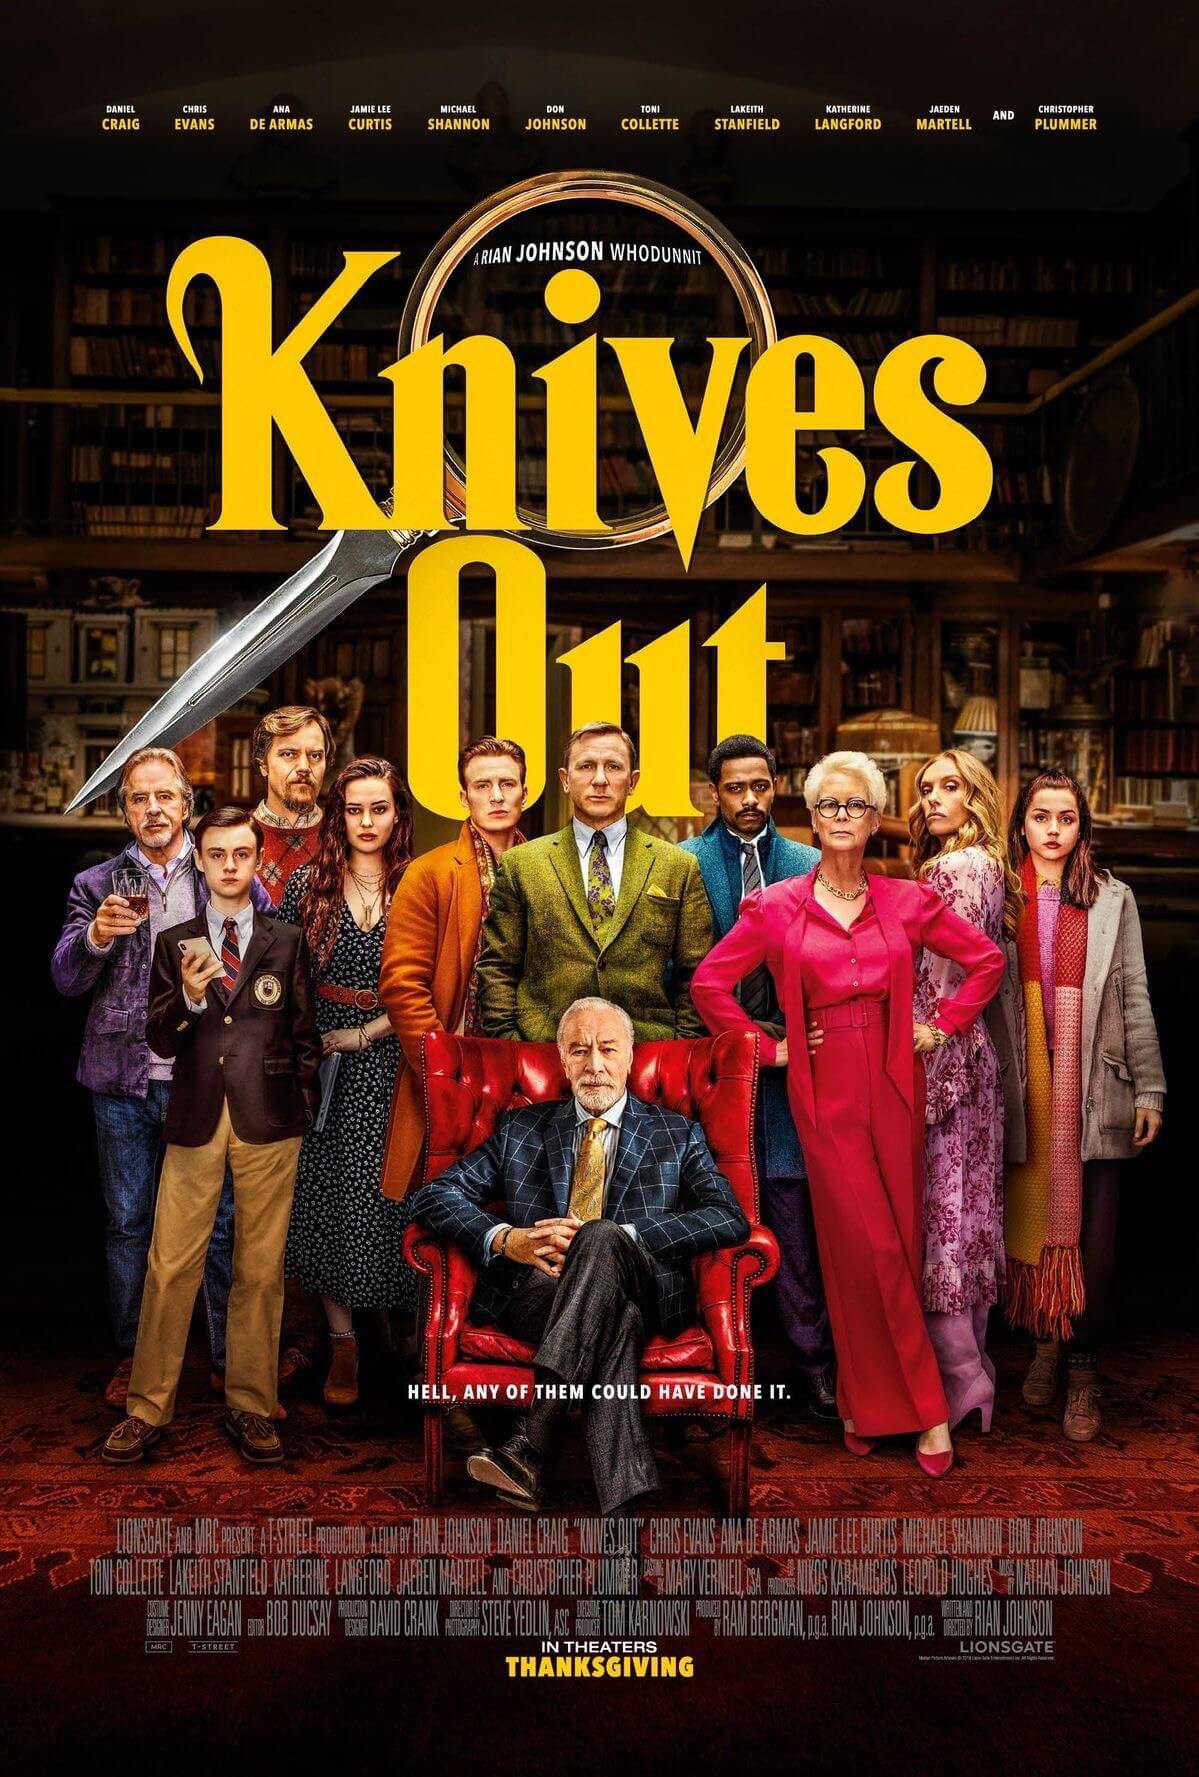 Knives Out - Featured Image - Films - RetroWitch Film Blog